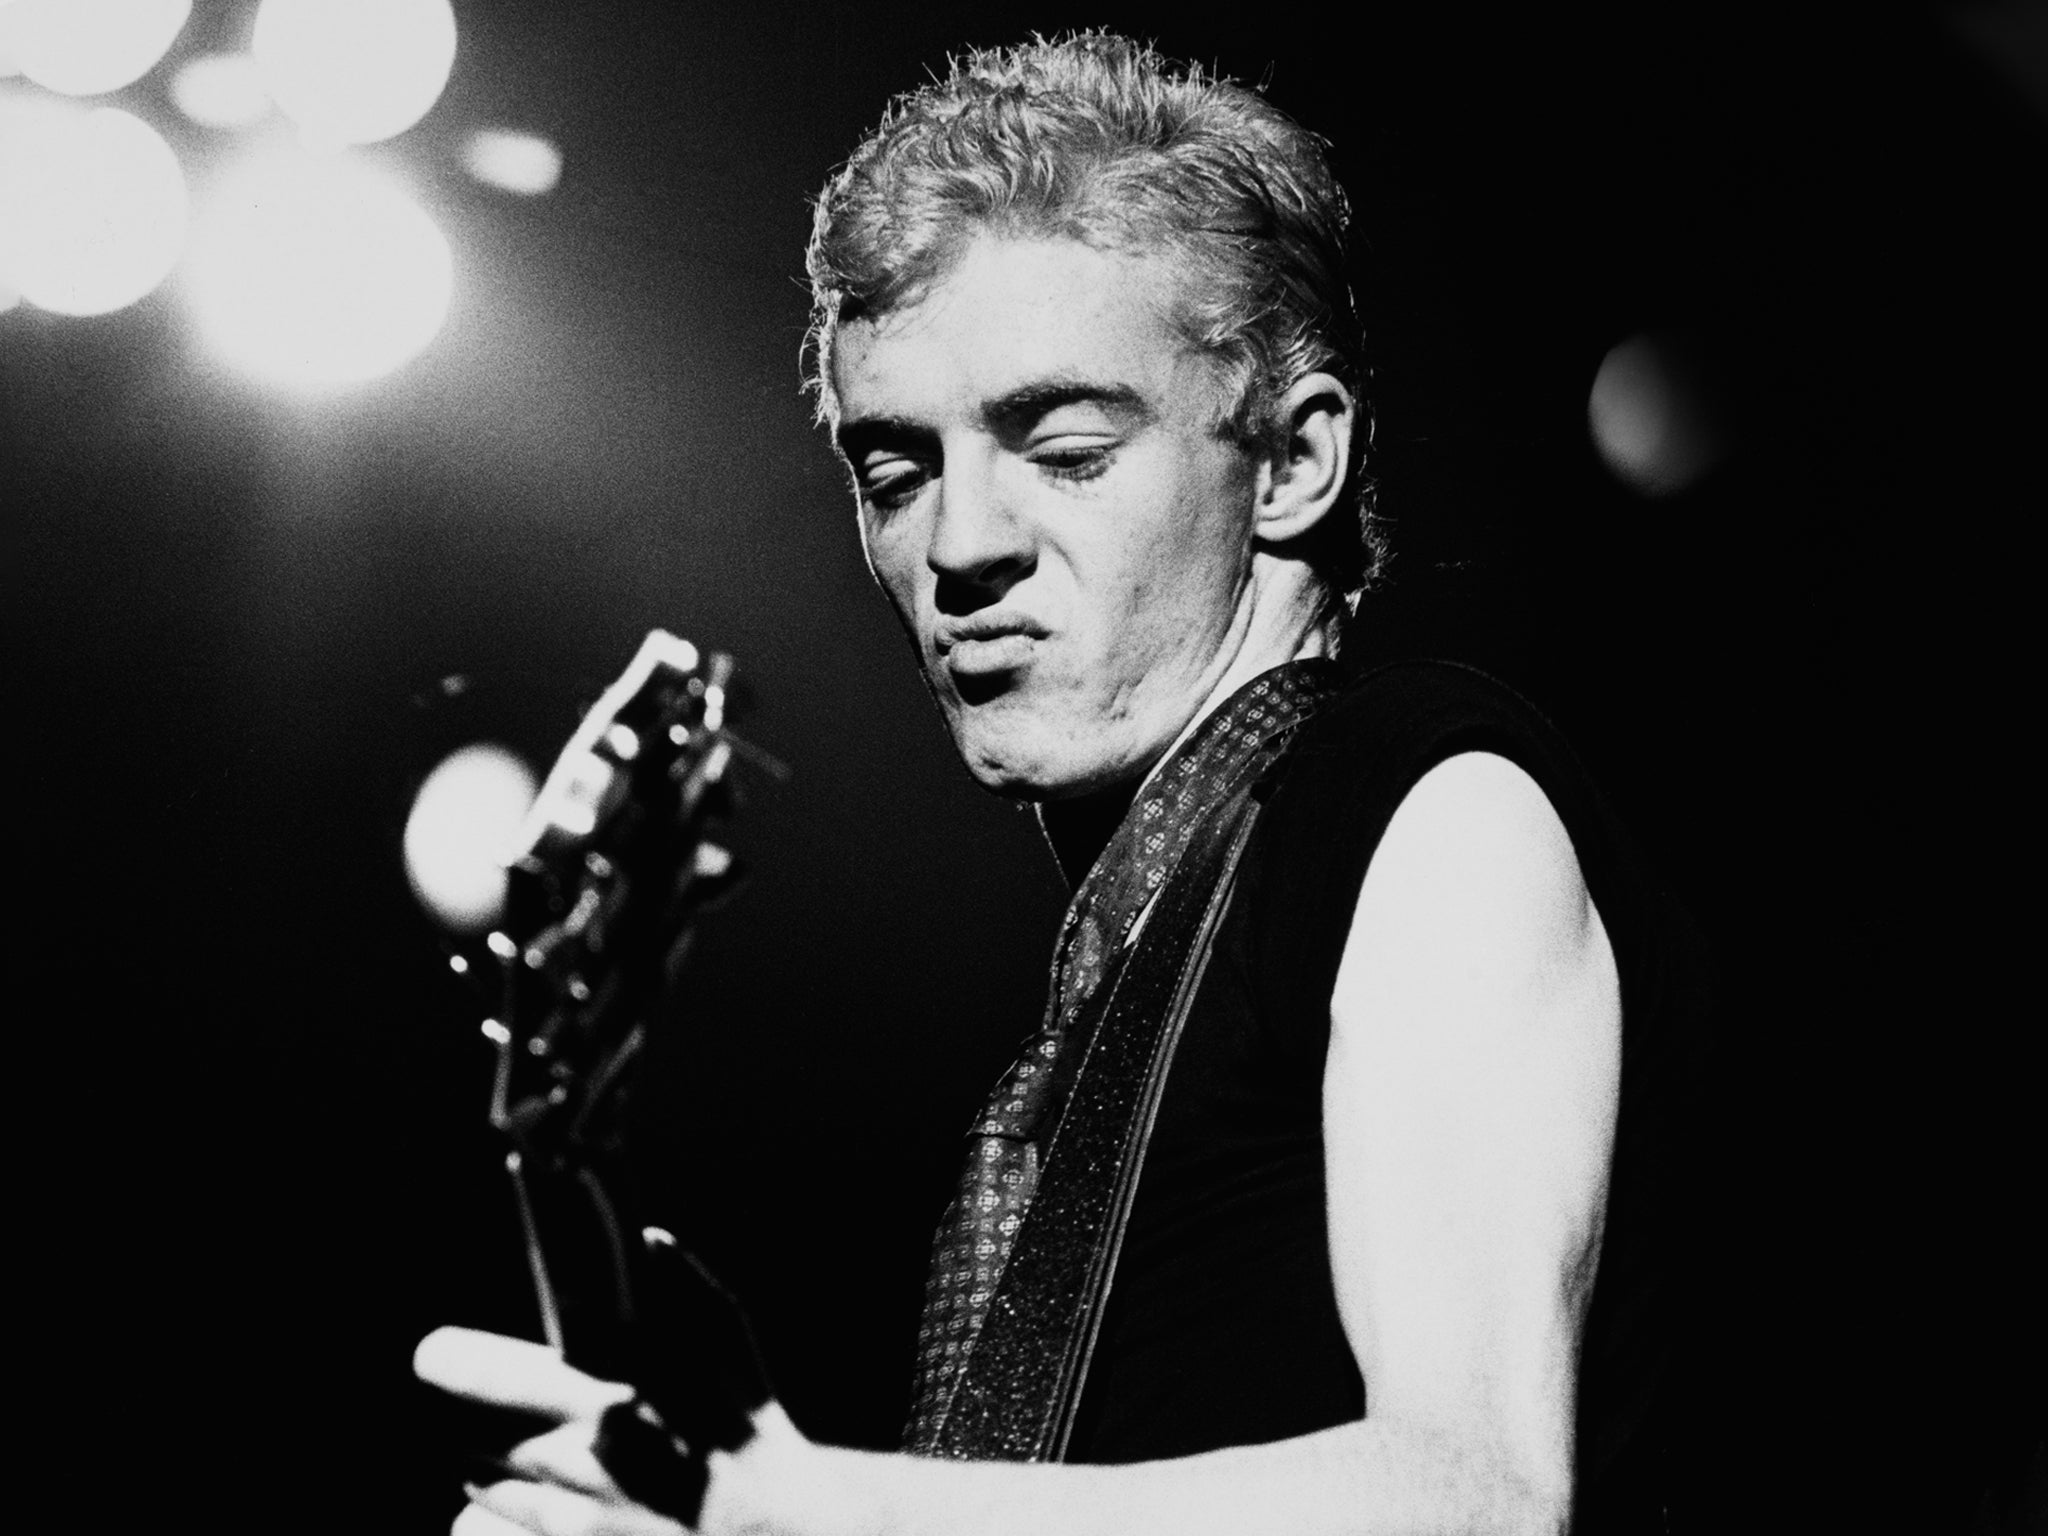 Irish singer-songwriter, guitarist and record producer Philip Chevron of punk band The Radiators from Space, 1977